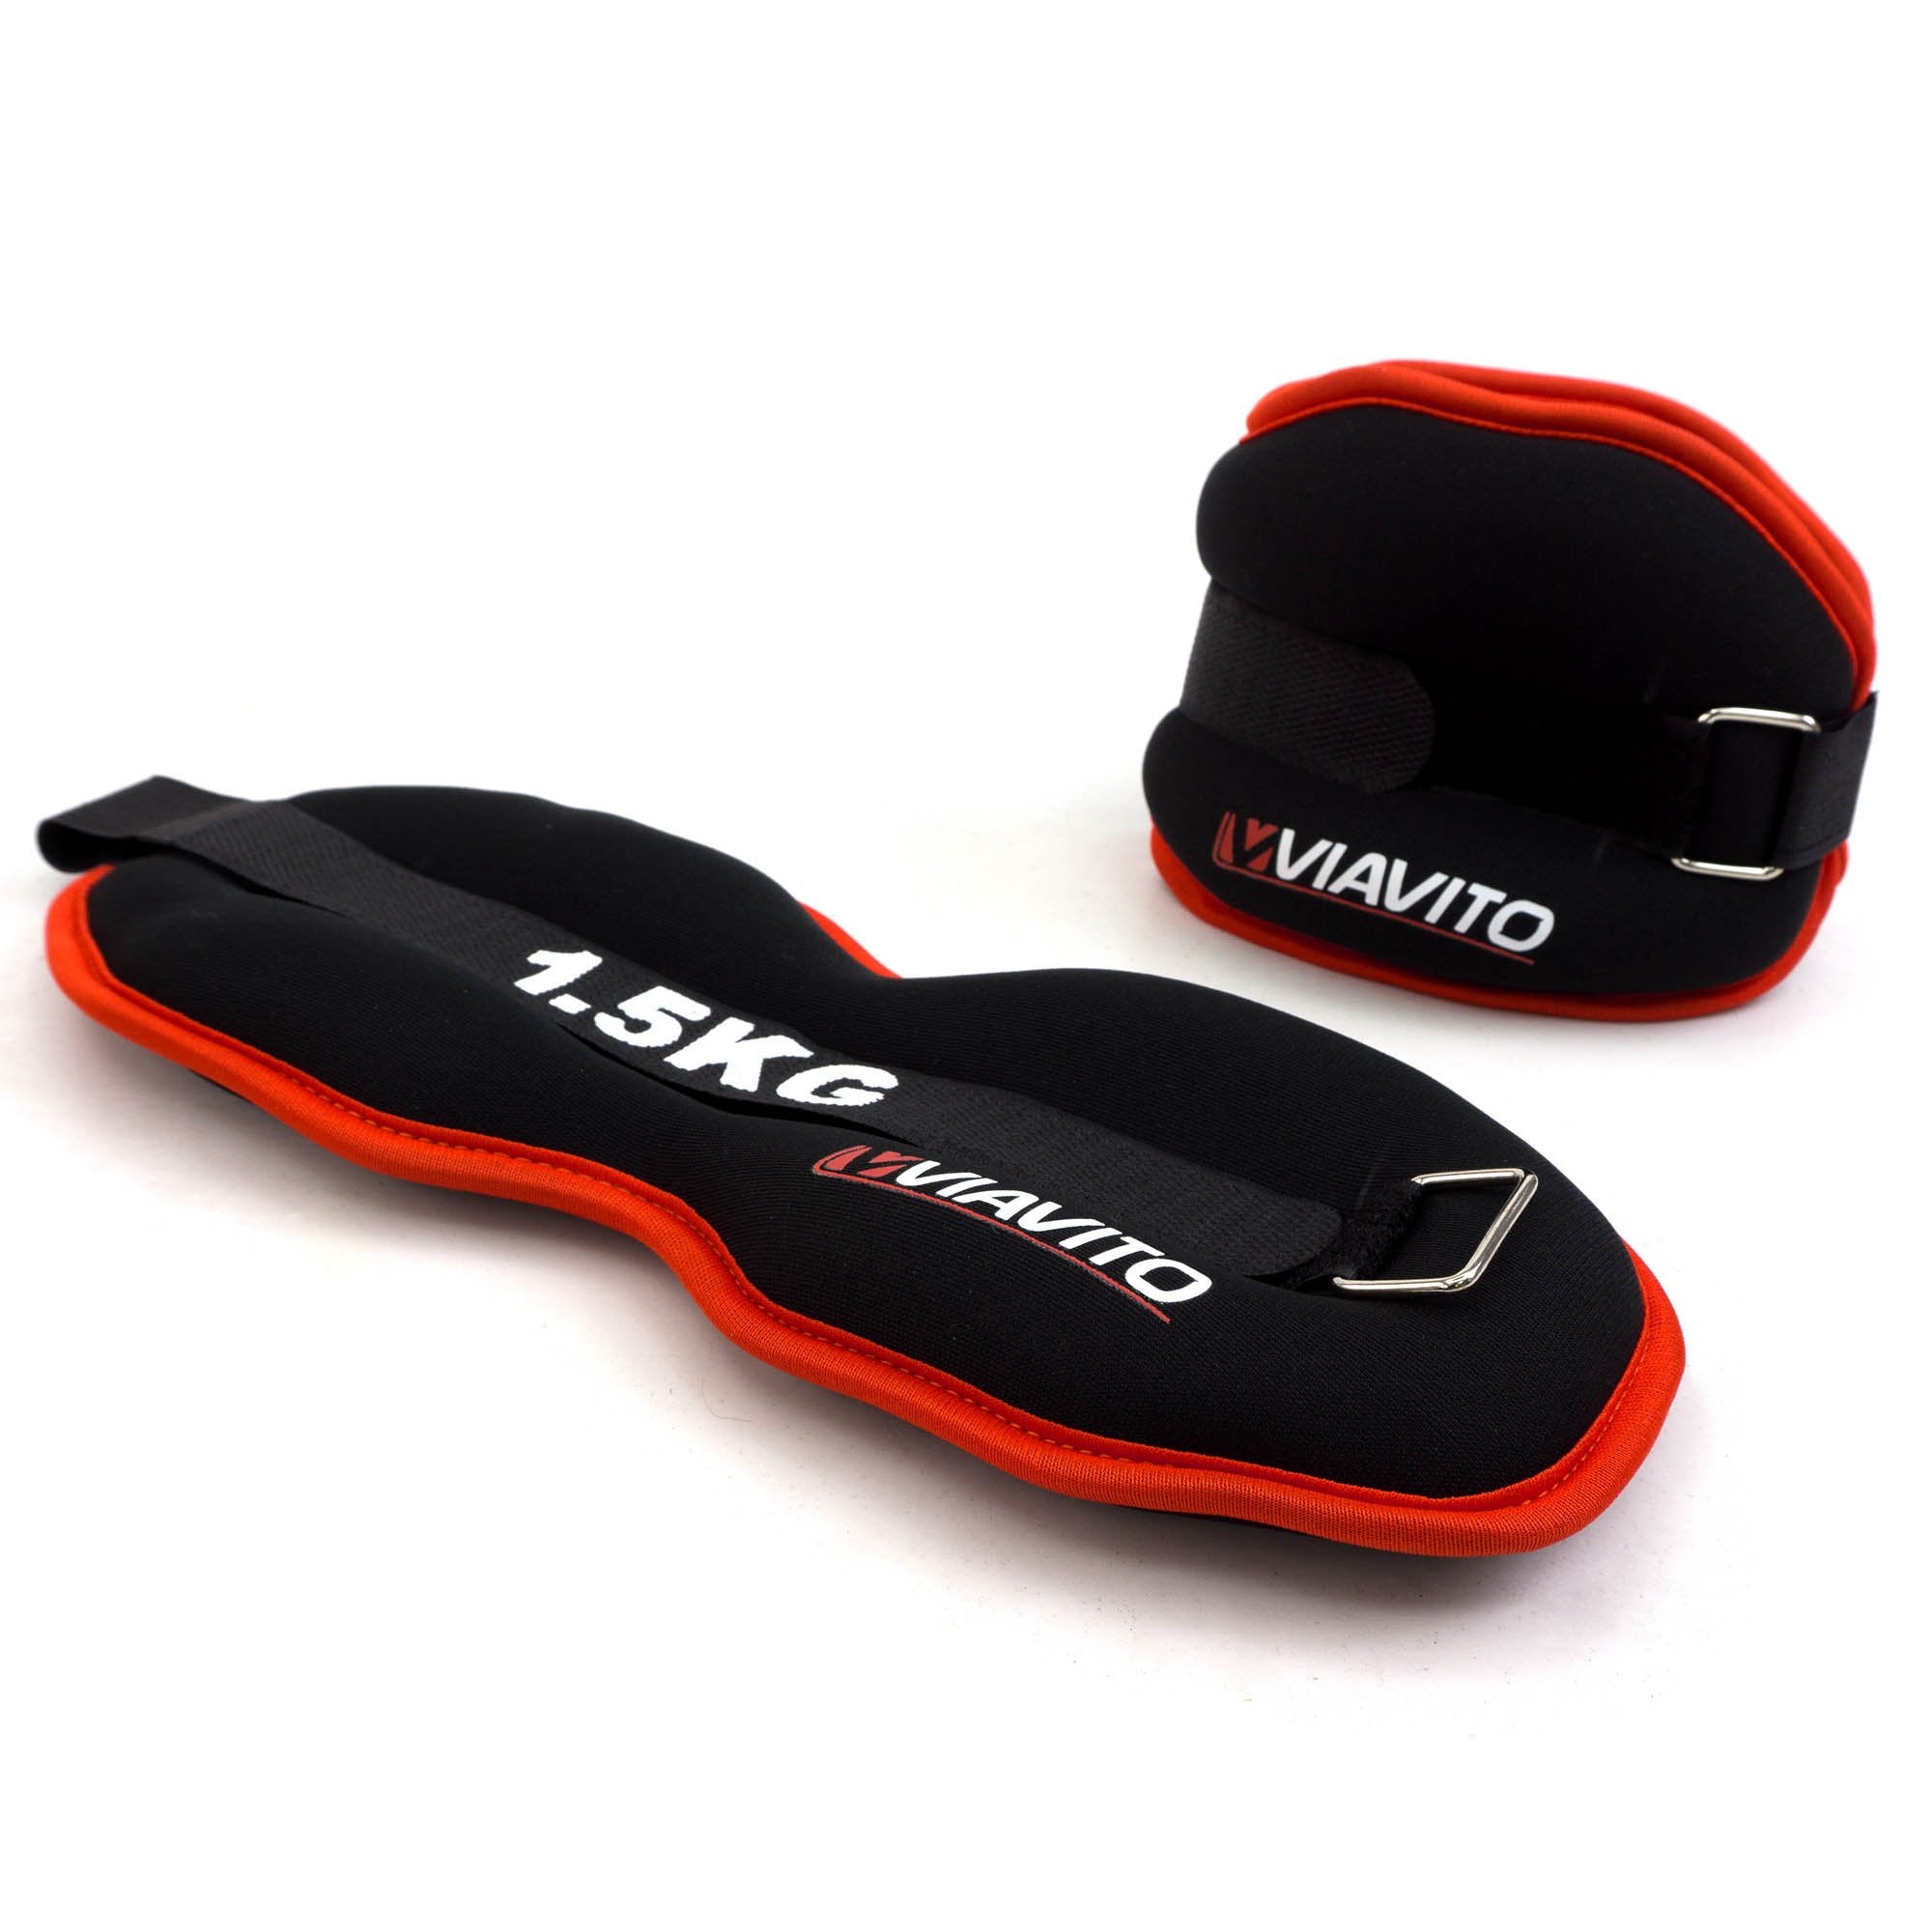 Viavito 2 x 1.5kg Ankle Weights